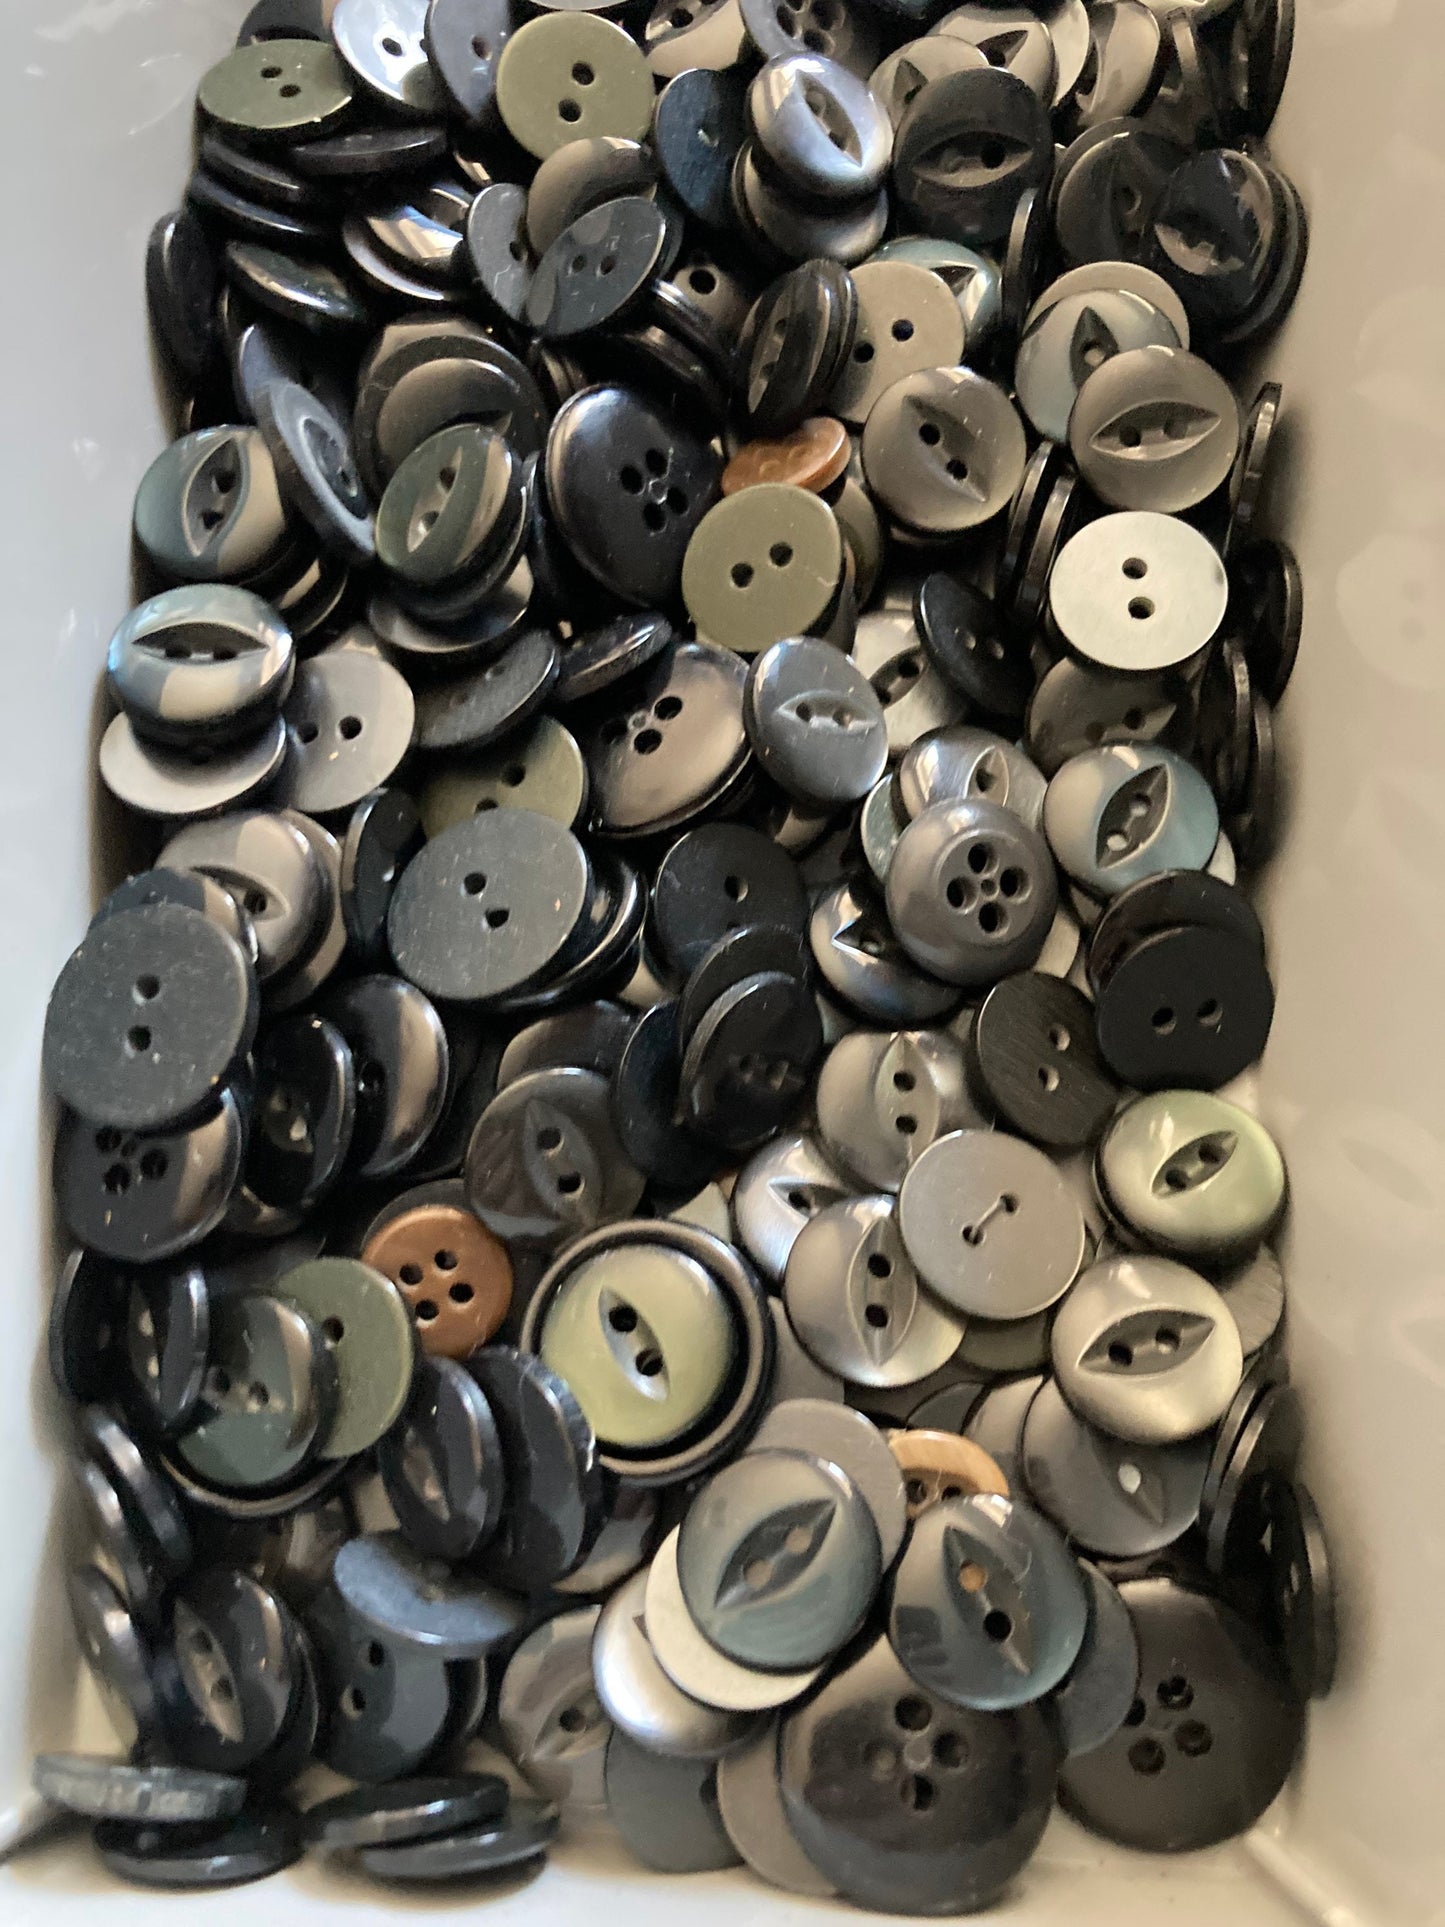 Job lot mixed size plastic buttons in dark blue grey navy blue many vintage retro lots listed approx 160 gms